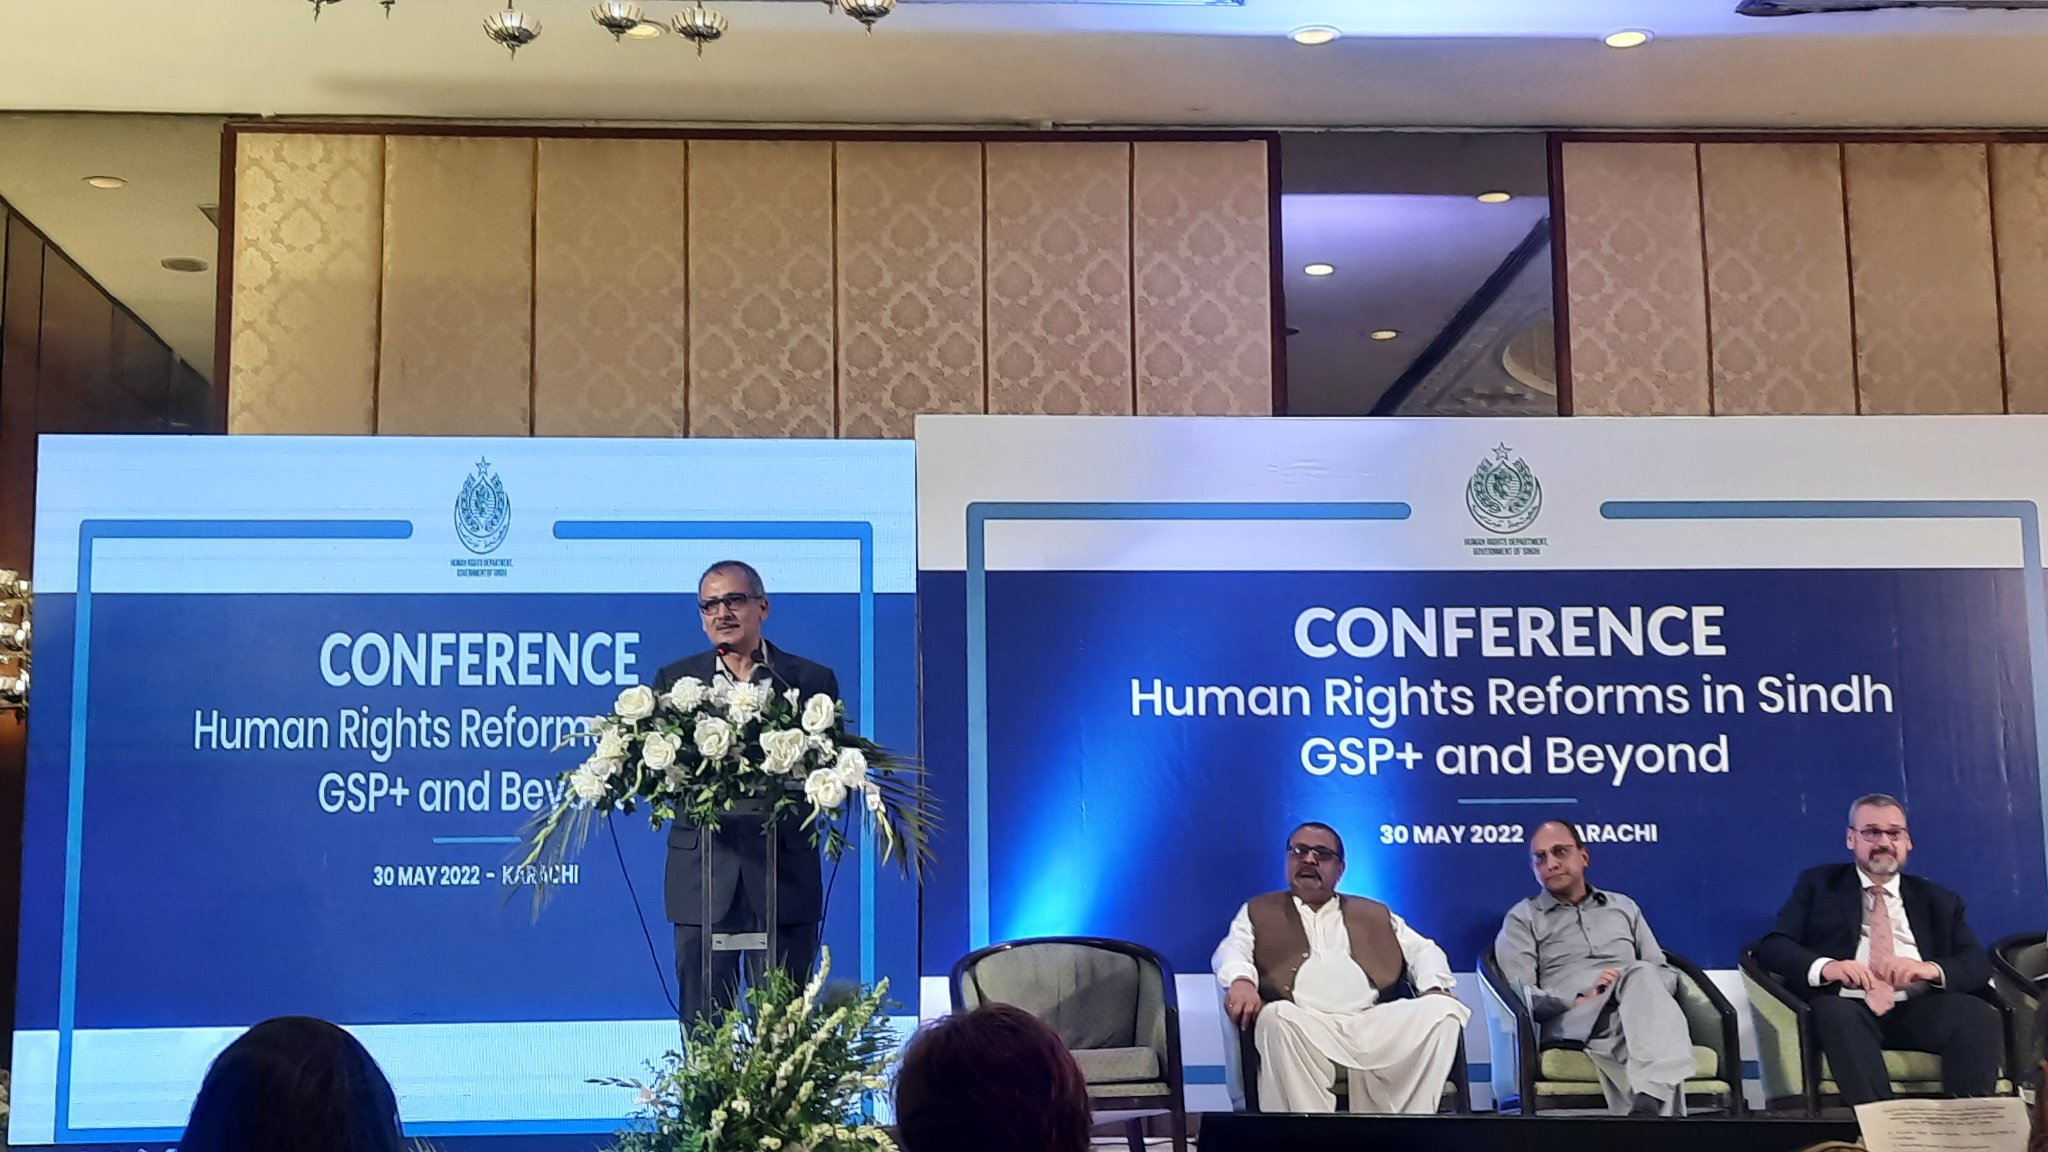 Human Rights reforms in Sindh GSP+ and Beyond